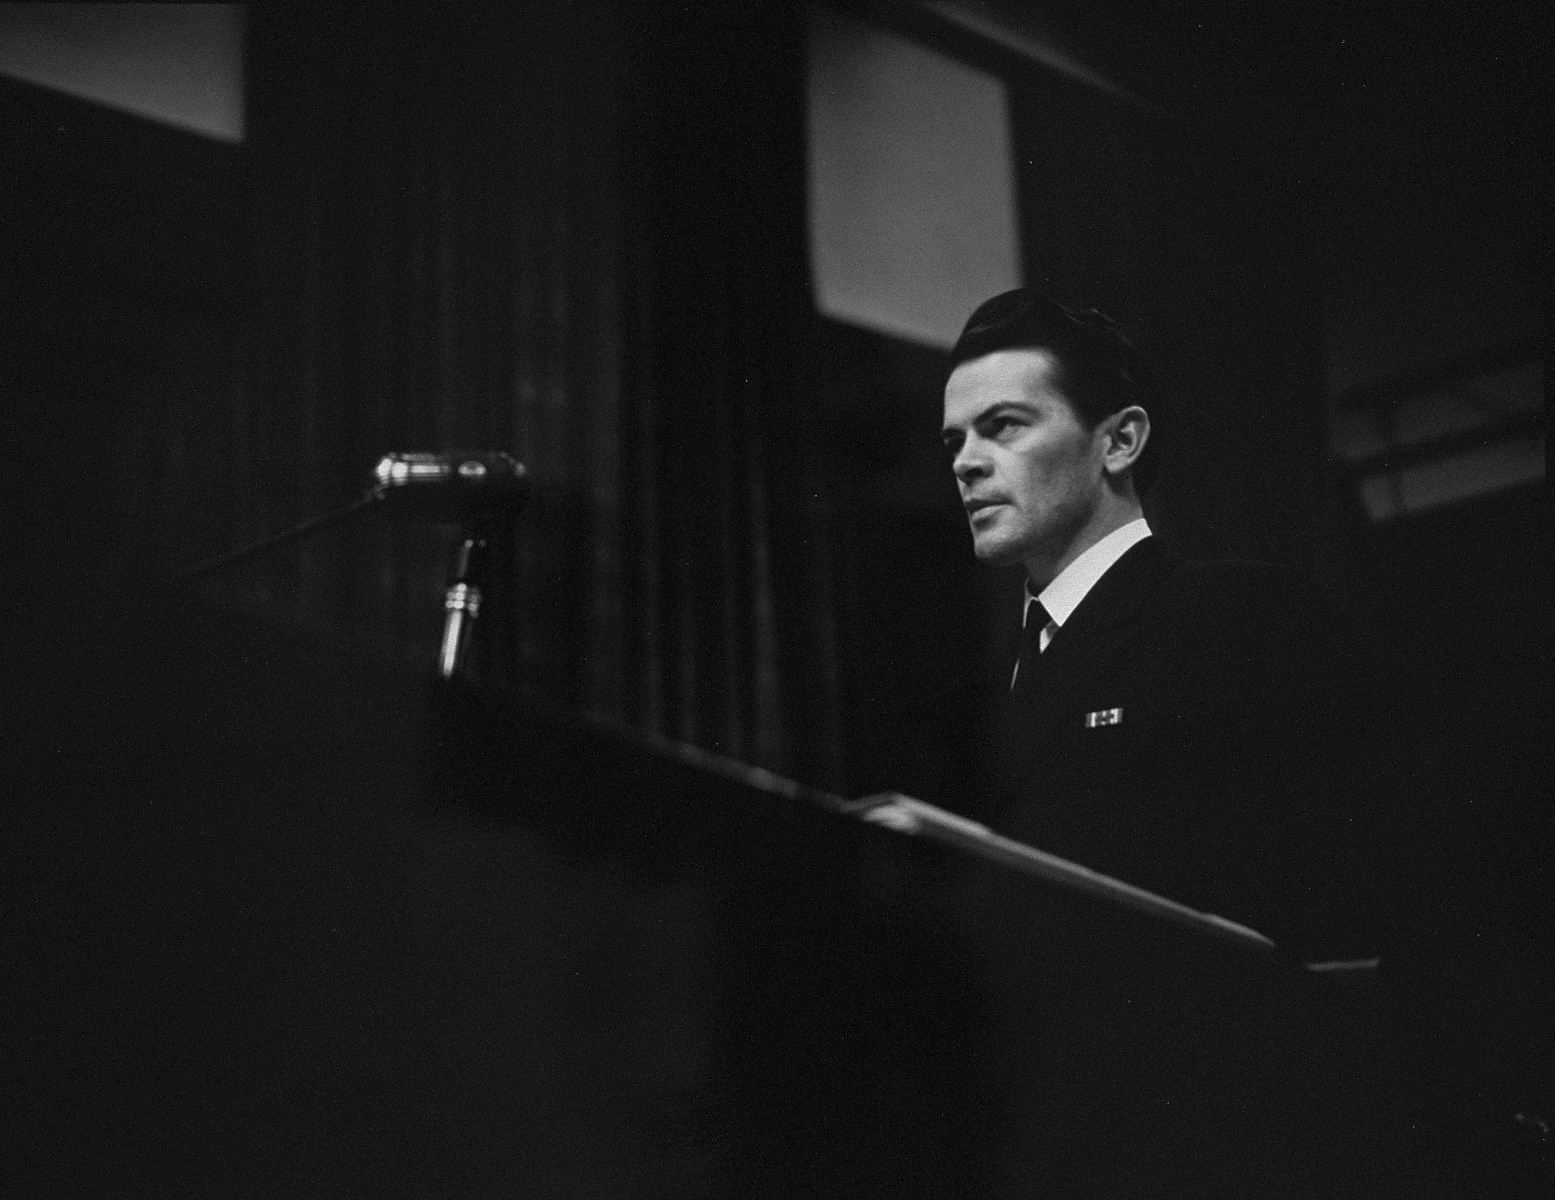 U.S. Assistant trial counsel Lt. Thomas F. Lambert, Jr. presents the prosecution's case against Martin Bormann at the International Military Tribunal for war criminals at Nuremberg.